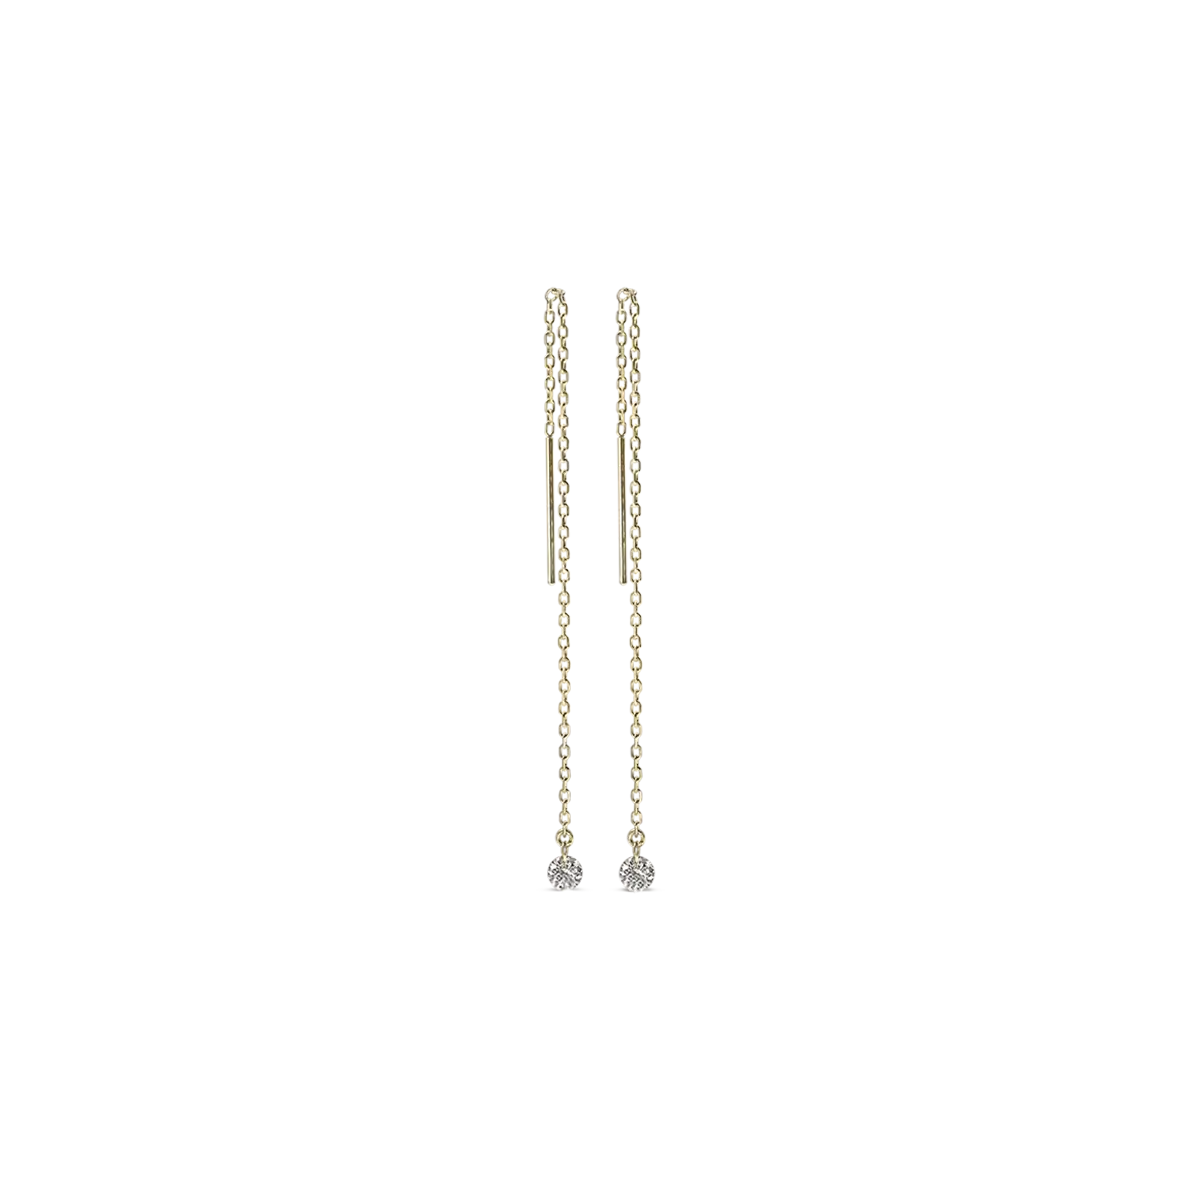 14k yellow gold with a single diamond at the bottom.   Pinhole Threaders  Dimensions: 3 1/8" long  Designed by ILA Collection